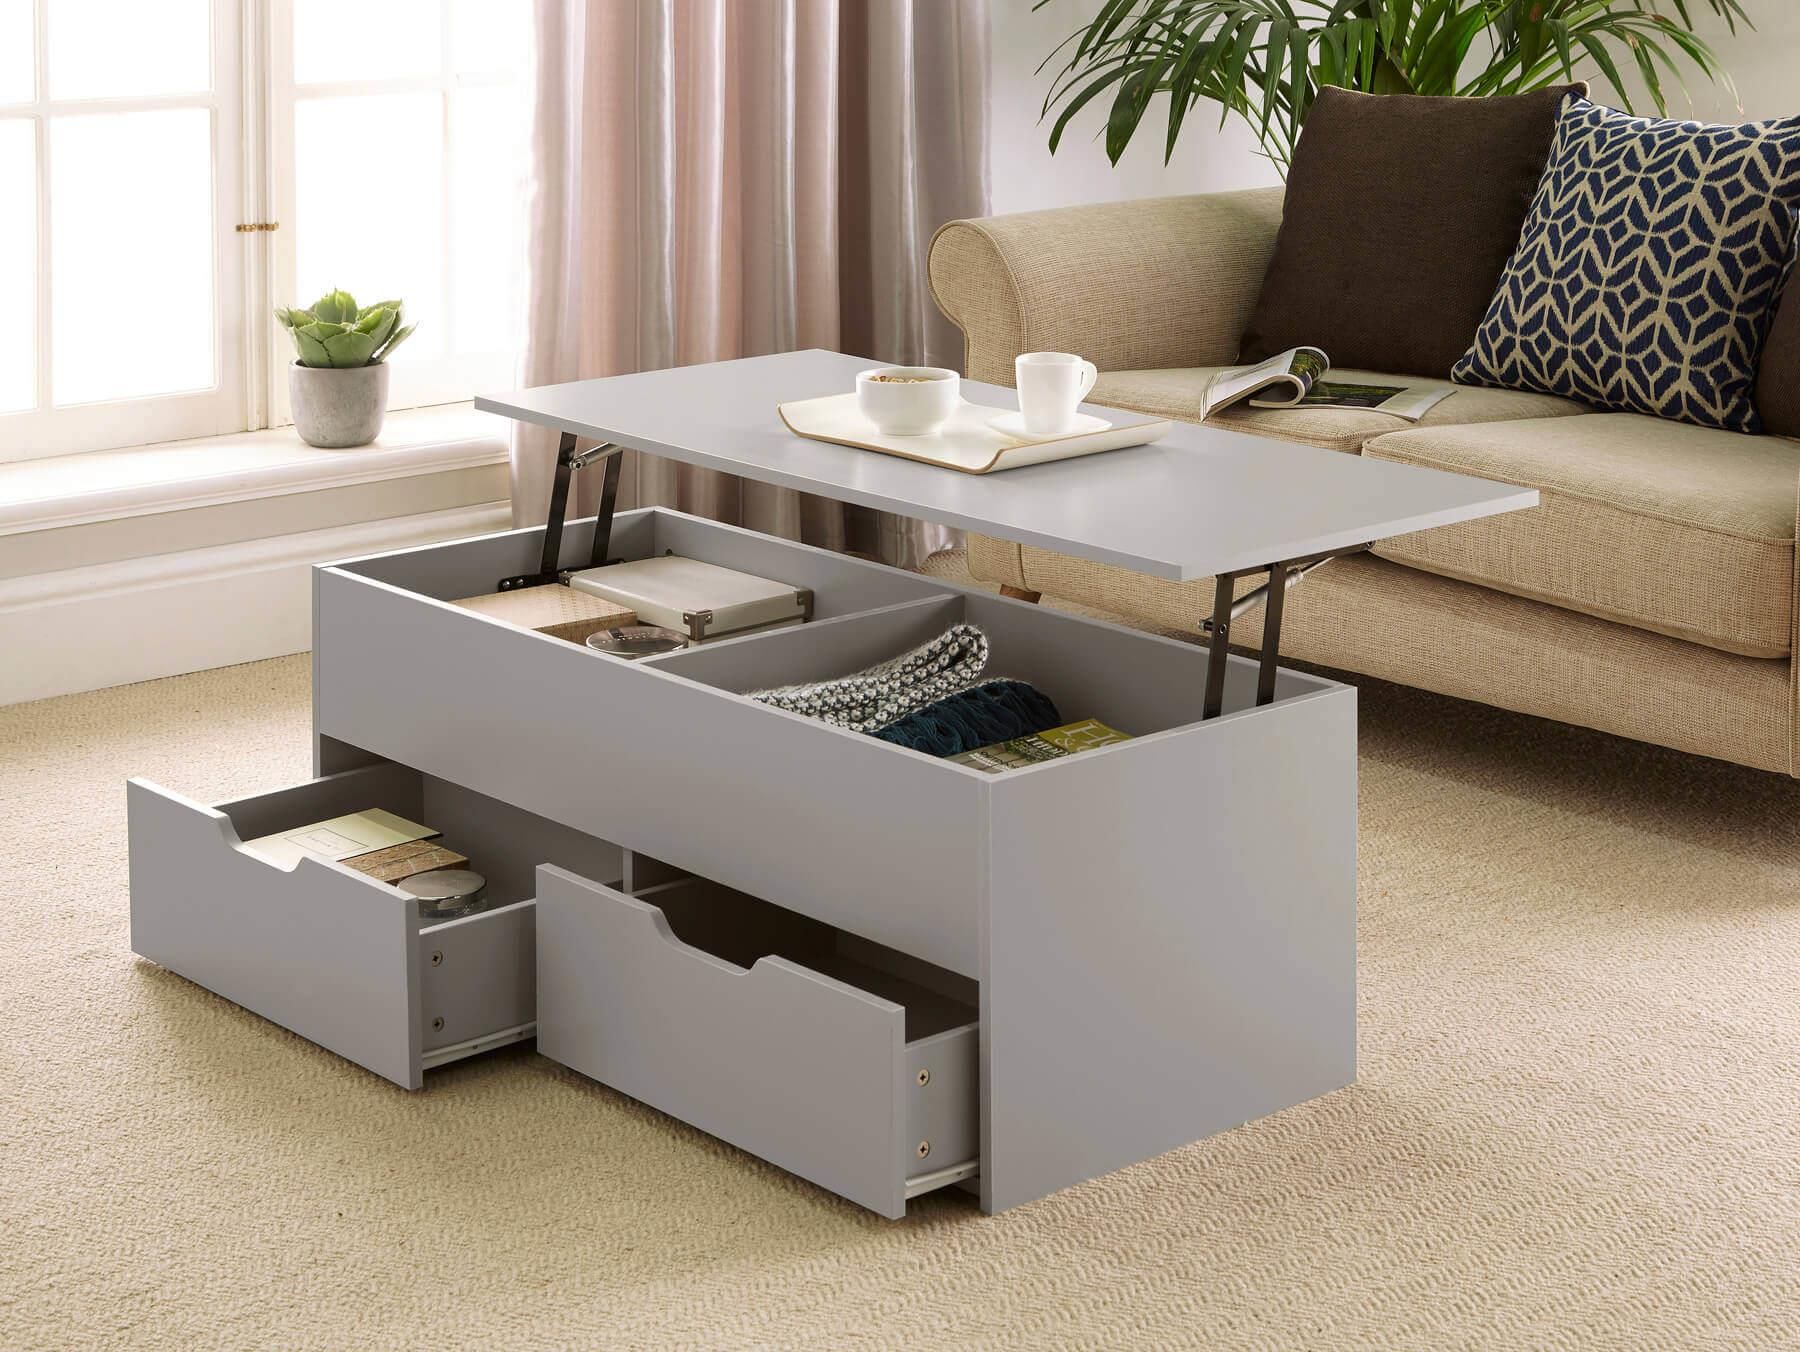 Grey Wooden Coffee Table With Lift Up Top And 2 Large Storage Drawers Pertaining To Lift Top Coffee Tables With Storage Drawers (View 8 of 20)